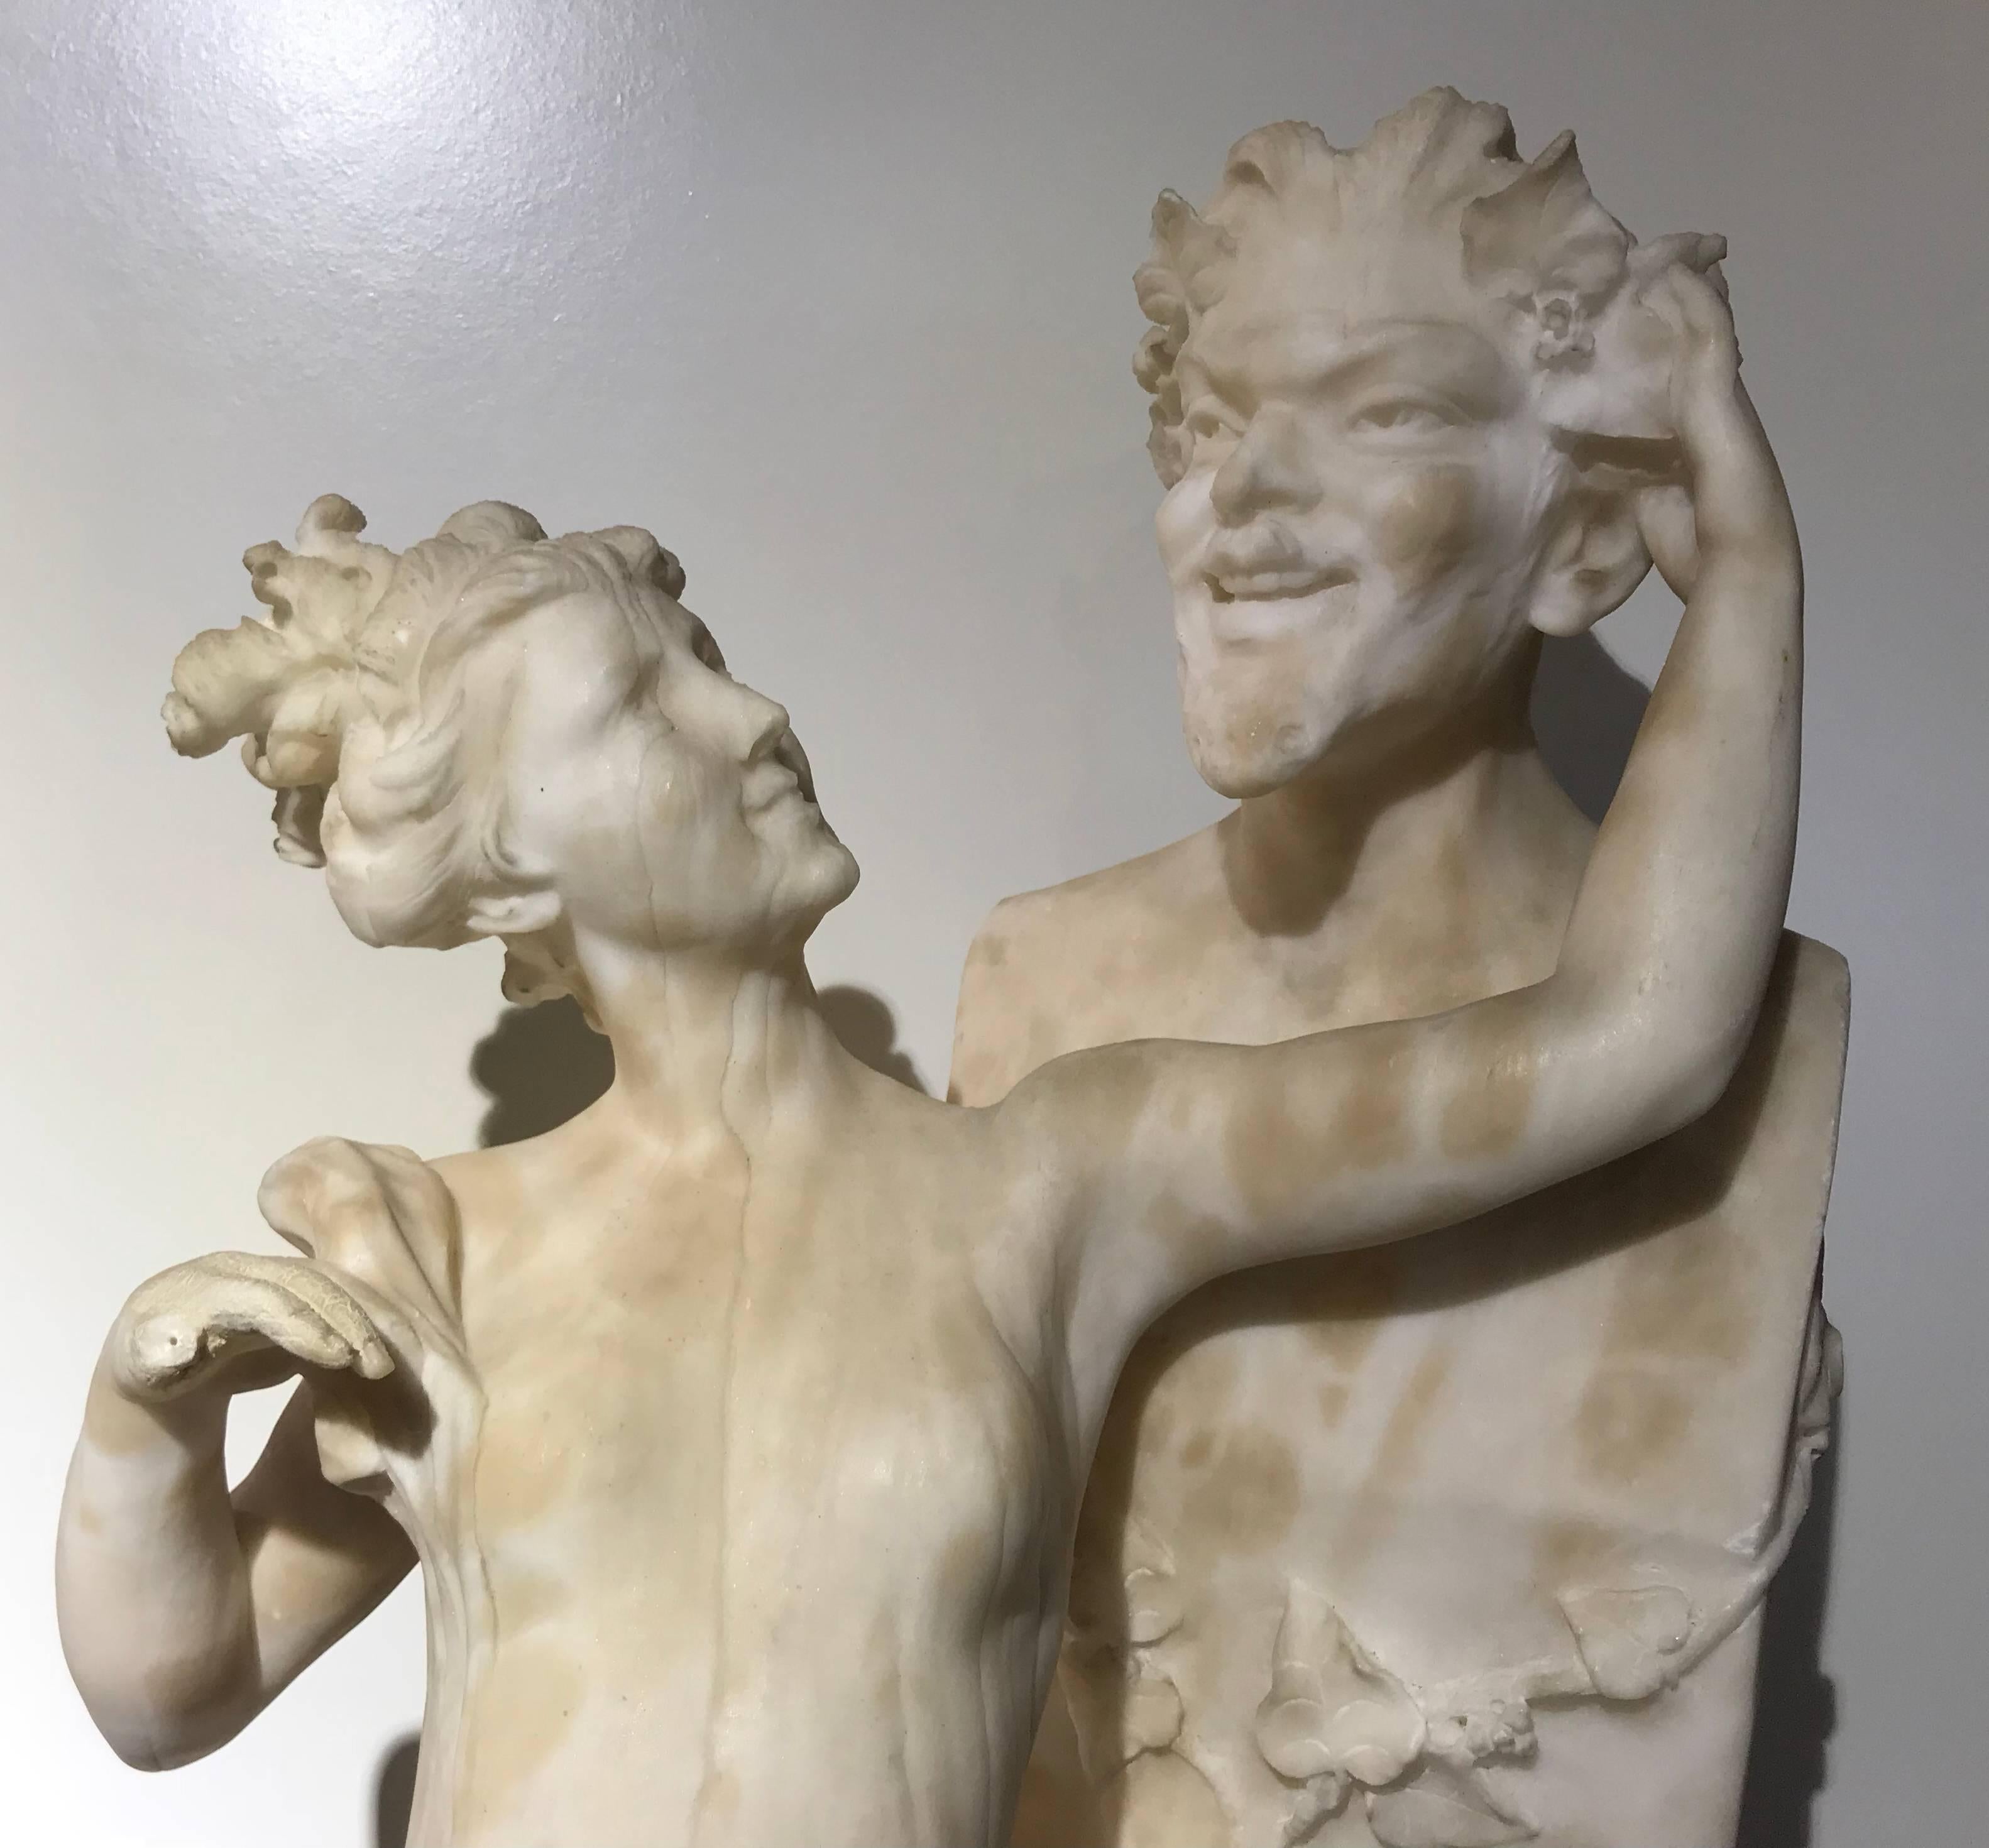 Italian Tuscany Neoclassical Style White Alabaster Sculpture Signed Fiaschi For Sale 11